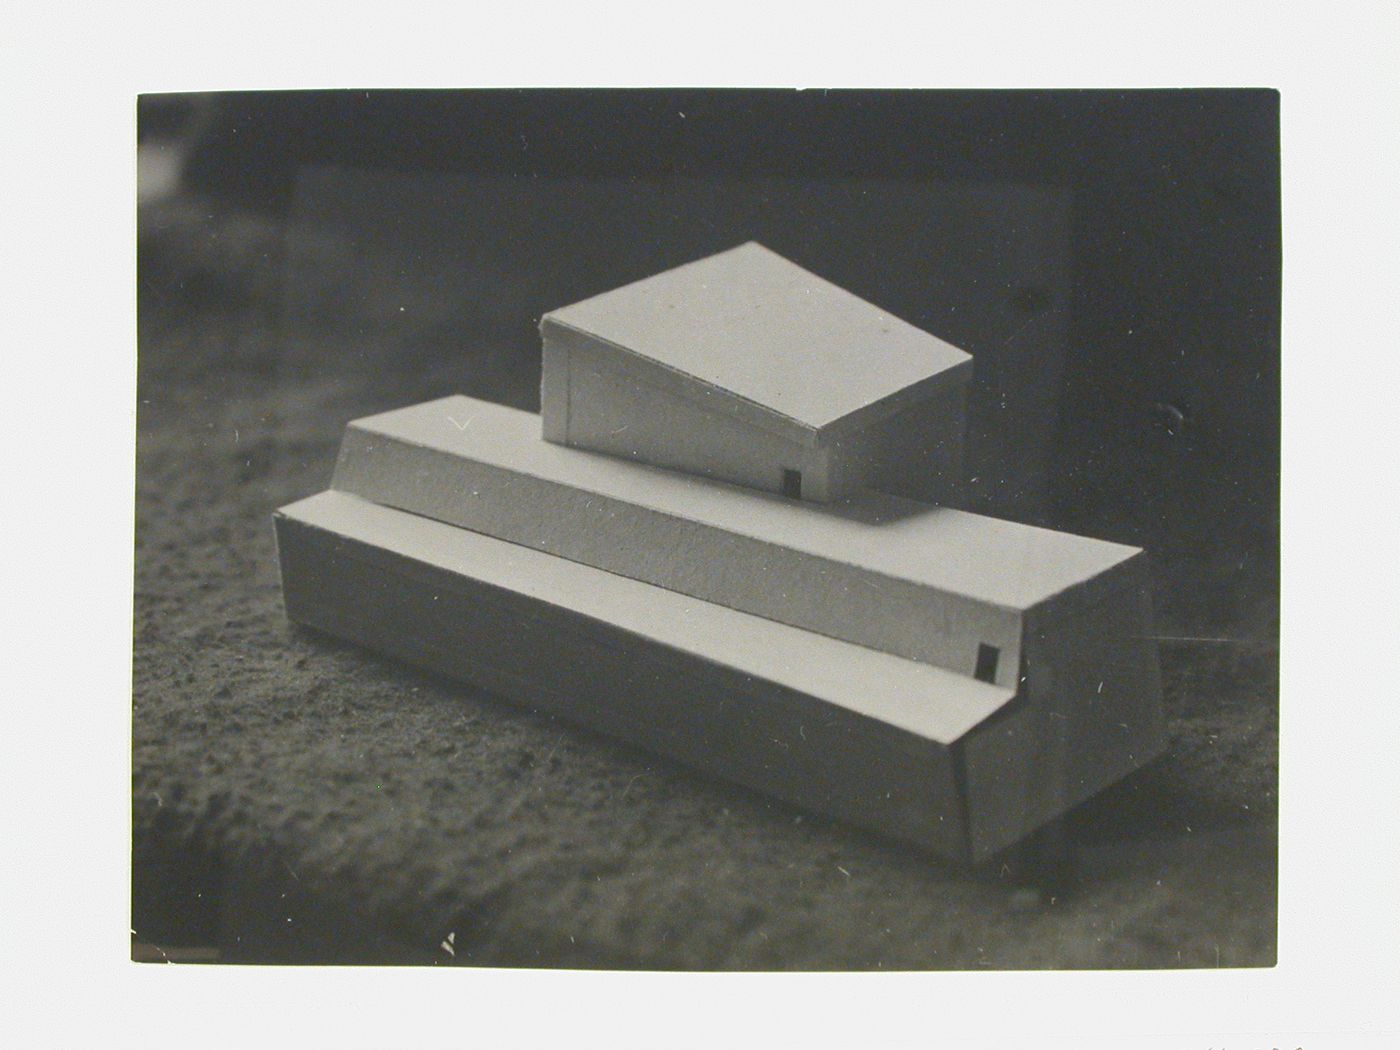 Photograph of a model for an exhibition building for an All-Union Palace of the Arts, Moscow